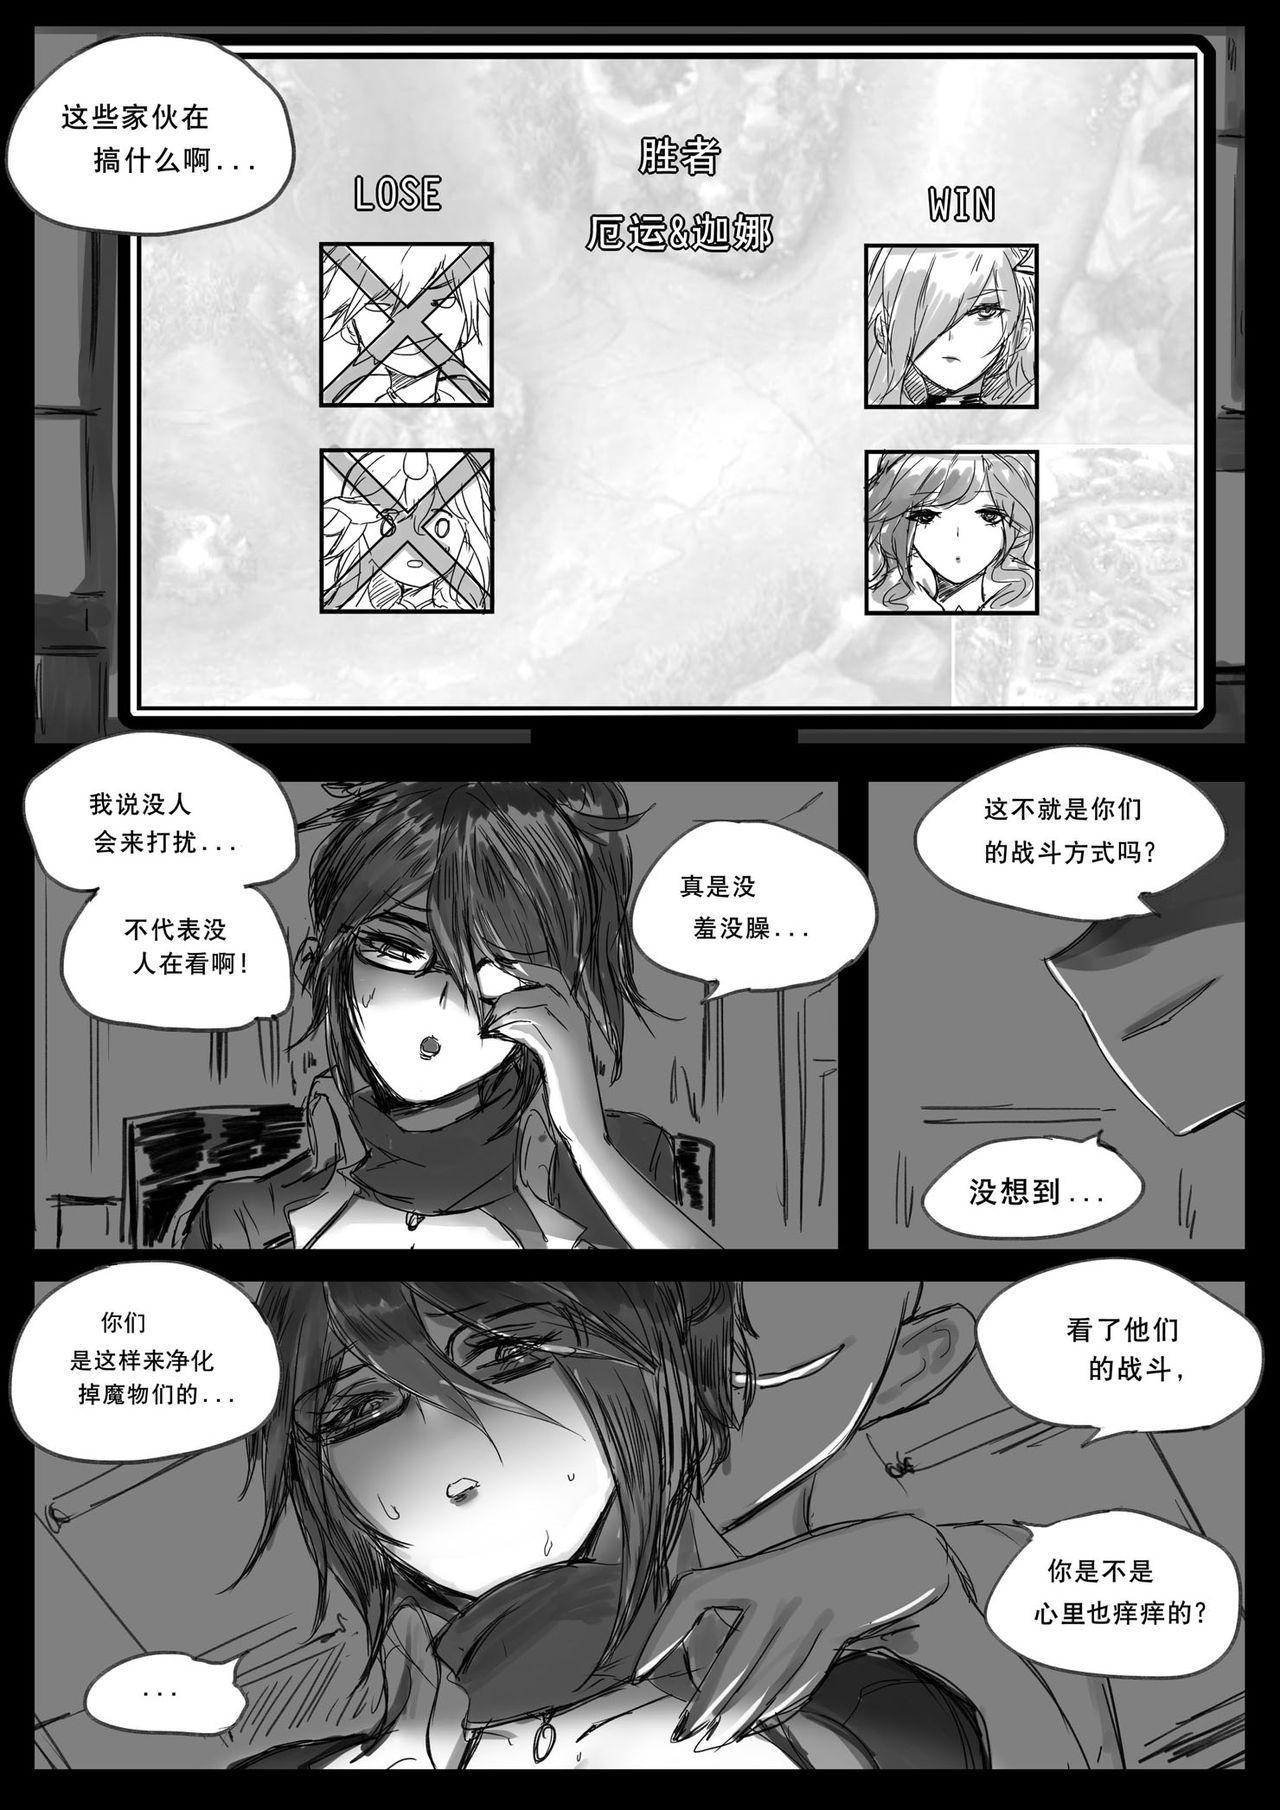 Hot Girl 守护者之Xing2 - League of legends Amateurs Gone - Page 45